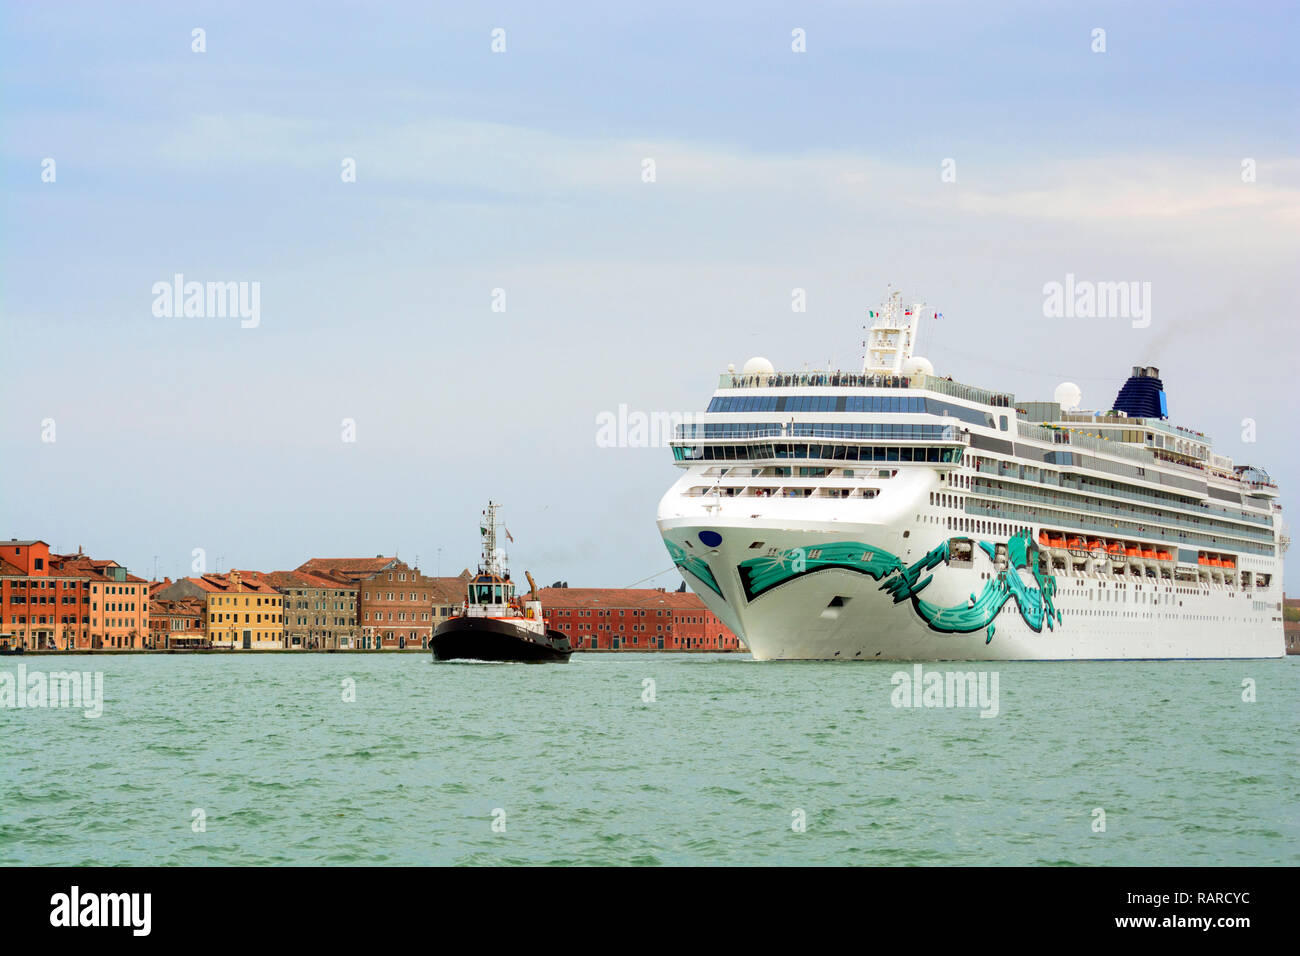 Small tugboat pulls a big cruise ship against row of old houses in Venice Stock Photo